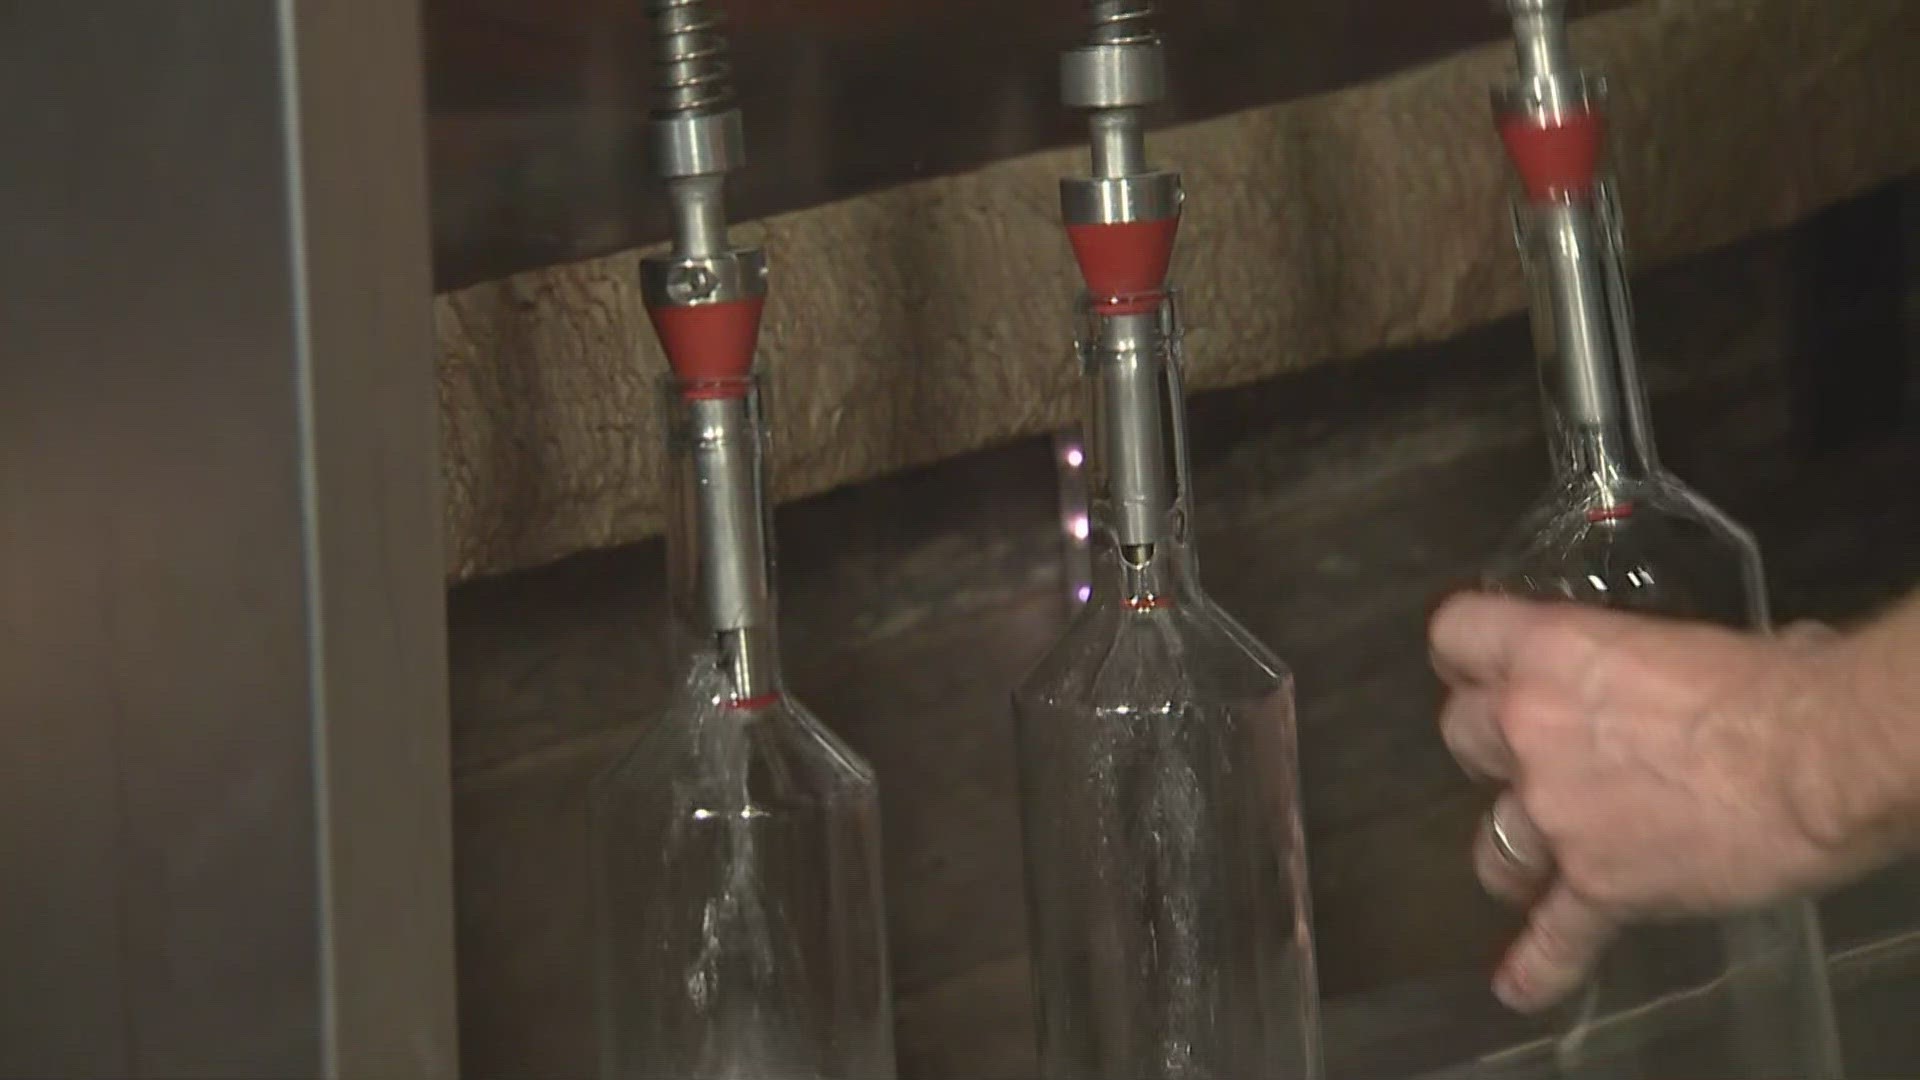 KVUE's Dominique Newland got a firsthand look at the rum-making process and how one Texas-based distillery has goals of expansion.